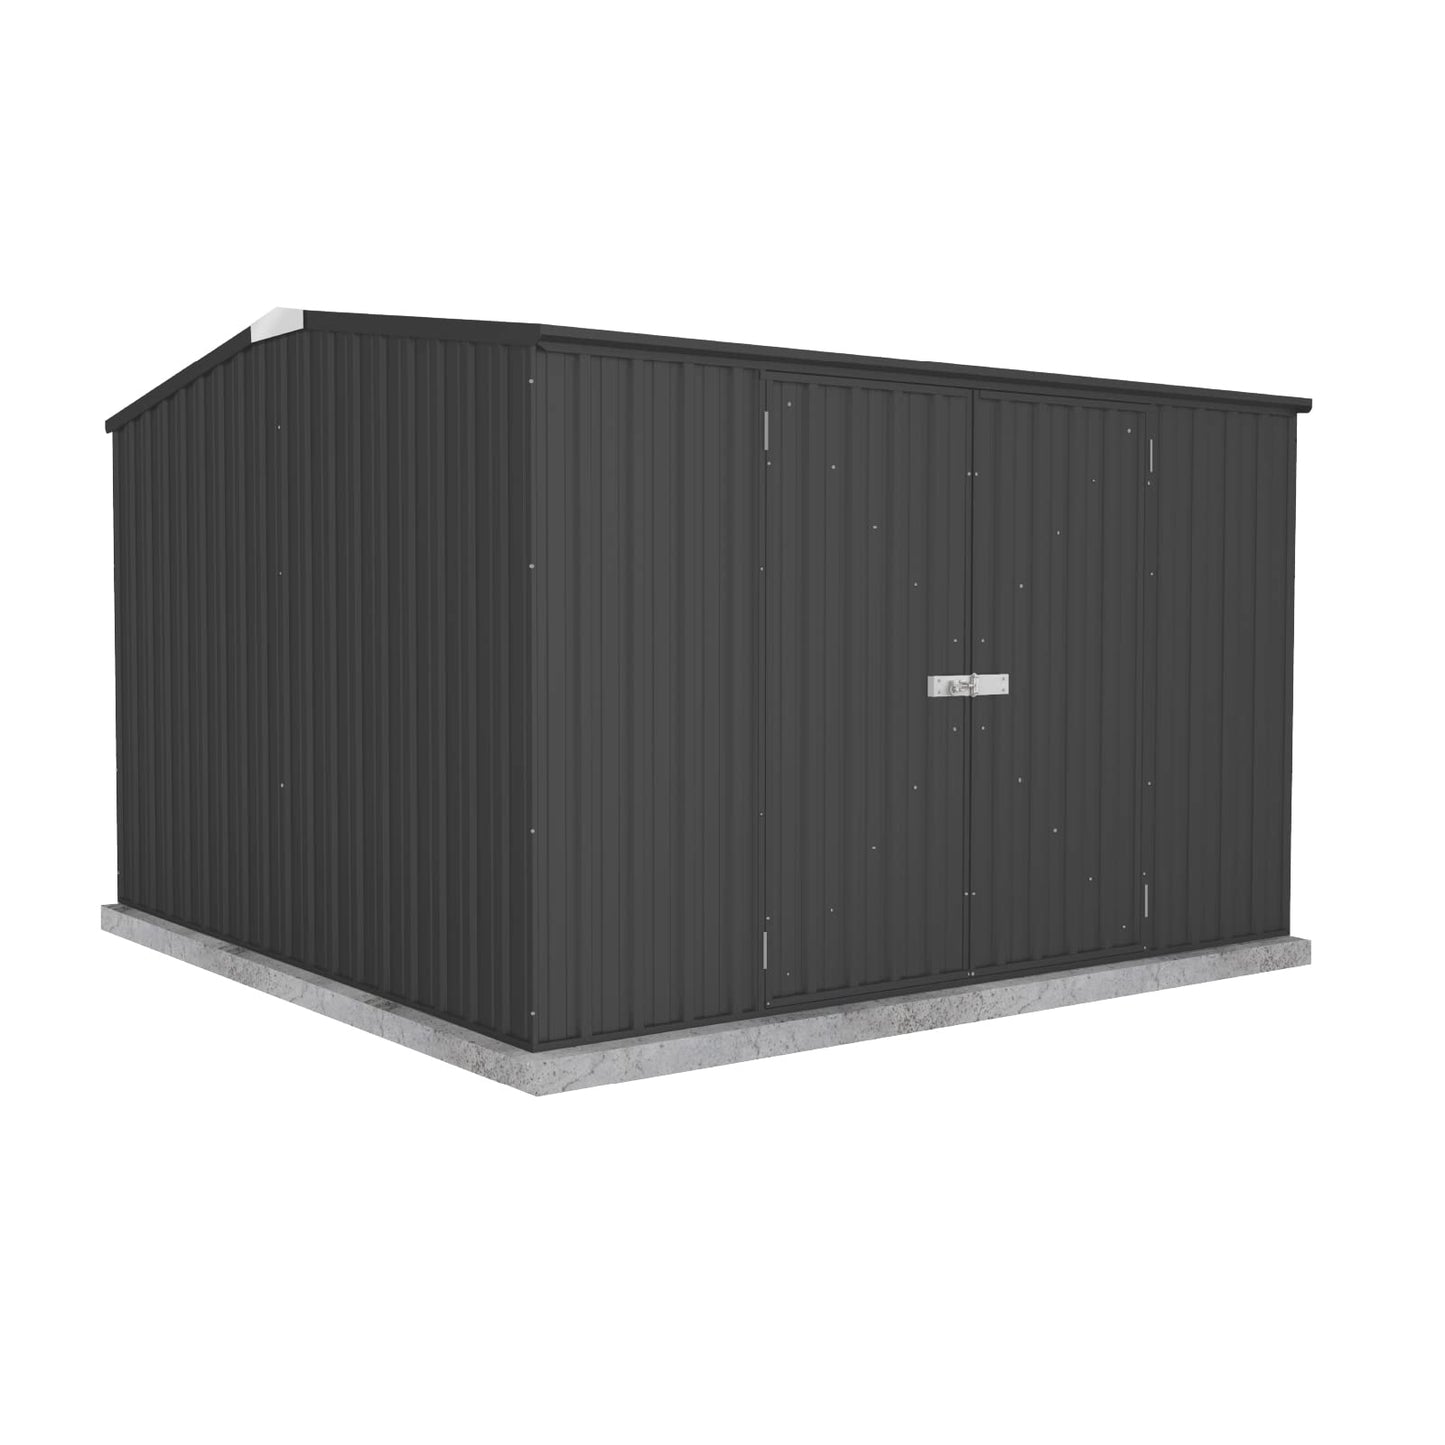 ABSCO Premier 10 x 10 Ft. Metal Storage Shed, Aluminum and Steel Utility Tool Shed, Outdoor Storage for Backyard, Lawn Patio, 100 Sq. Ft, Monument Gray (MN30302GK-PTX) 10'x10'